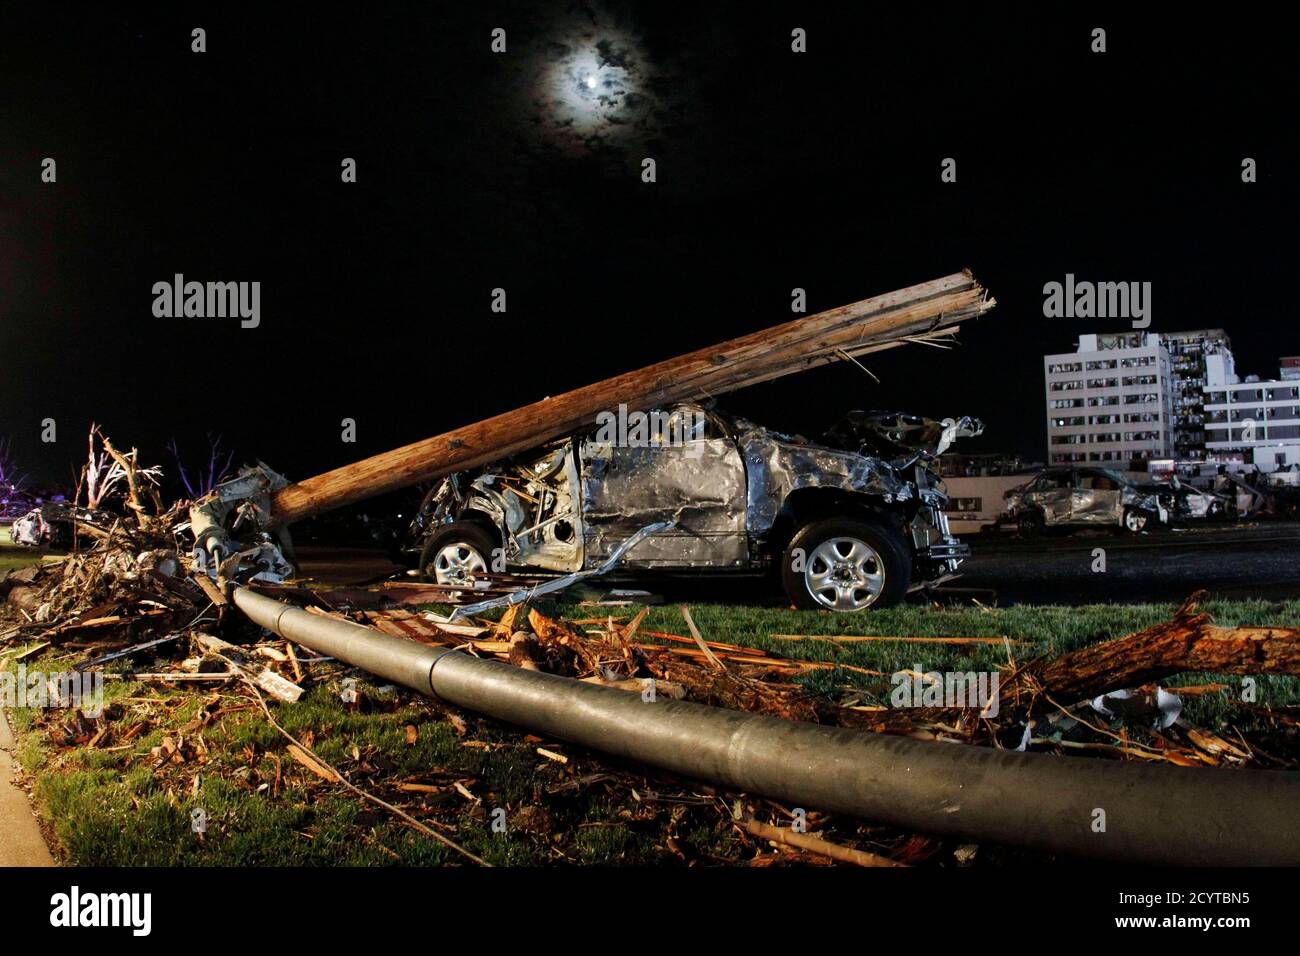 a-damaged-car-is-pictured-in-the-parking-lot-of-st-johns-regional-medical-center-after-a-tornado-swept-through-joplin-missouri-may-22-2011-at-least-89-people-have-died-in-a-monster-tornado-that-left-a-path-of-destruction-nearly-a-mile-1-km-wide-through-the-heart-of-joplin-missouri-and-directly-hit-the-small-midwestern-citys-main-hospital-local-officials-said-on-monday-picture-taken-may-22-reutersed-zurga-united-states-tags-environment-disaster-images-of-the-day-2CYTBN5.jpg